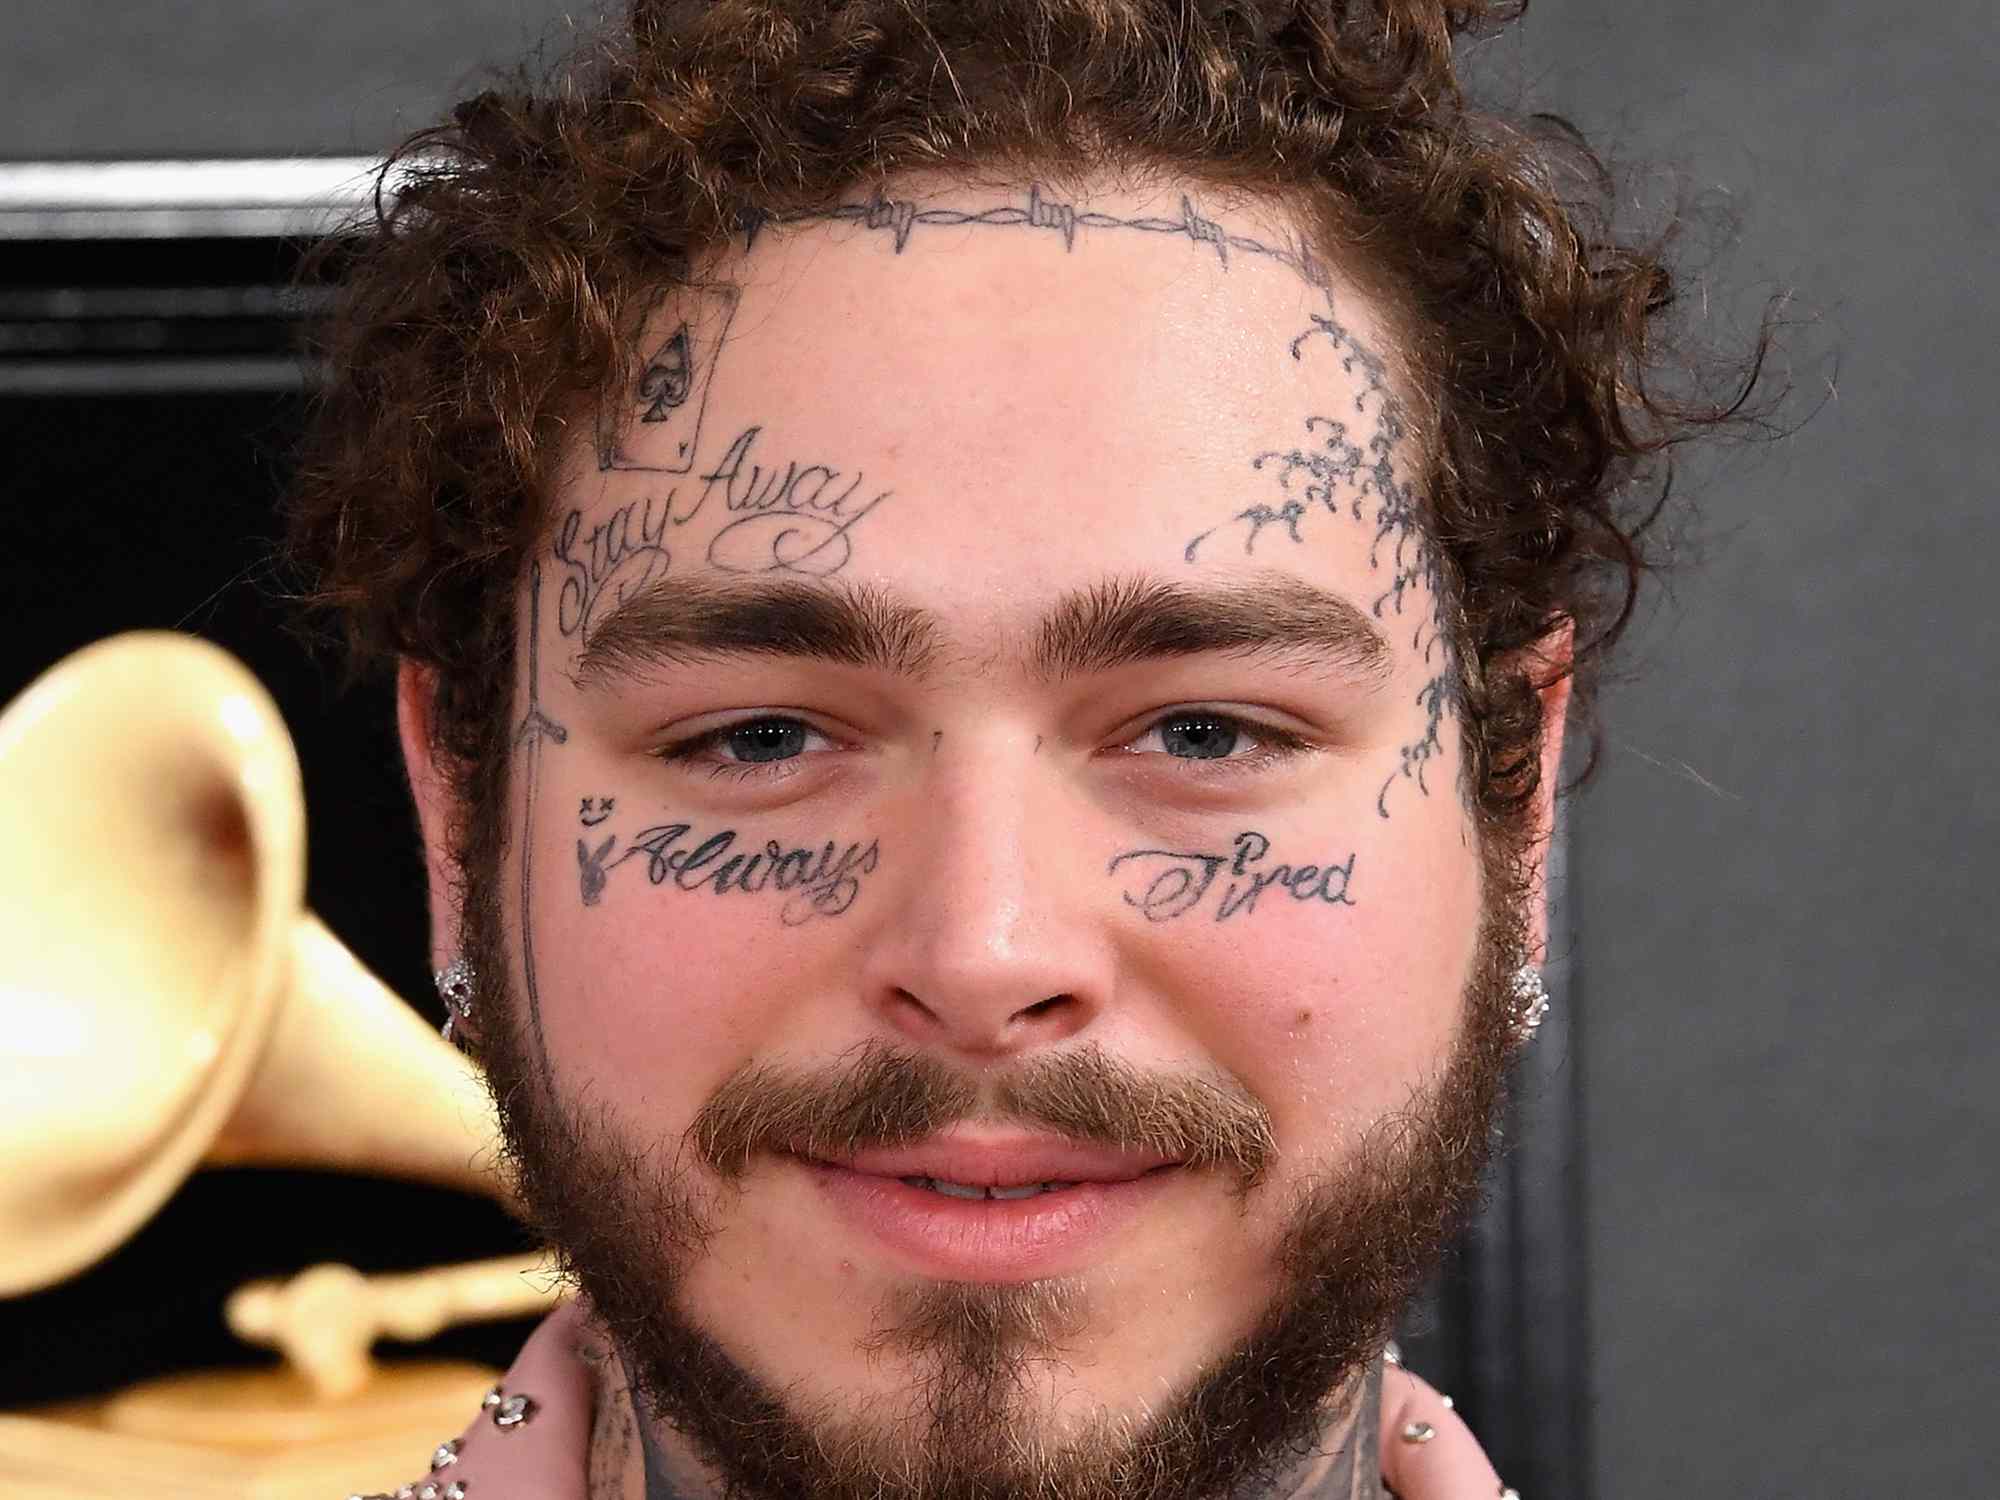 Post Malone attends the 61st Annual GRAMMY Awards at Staples Center on February 10, 2019 in Los Angeles, California